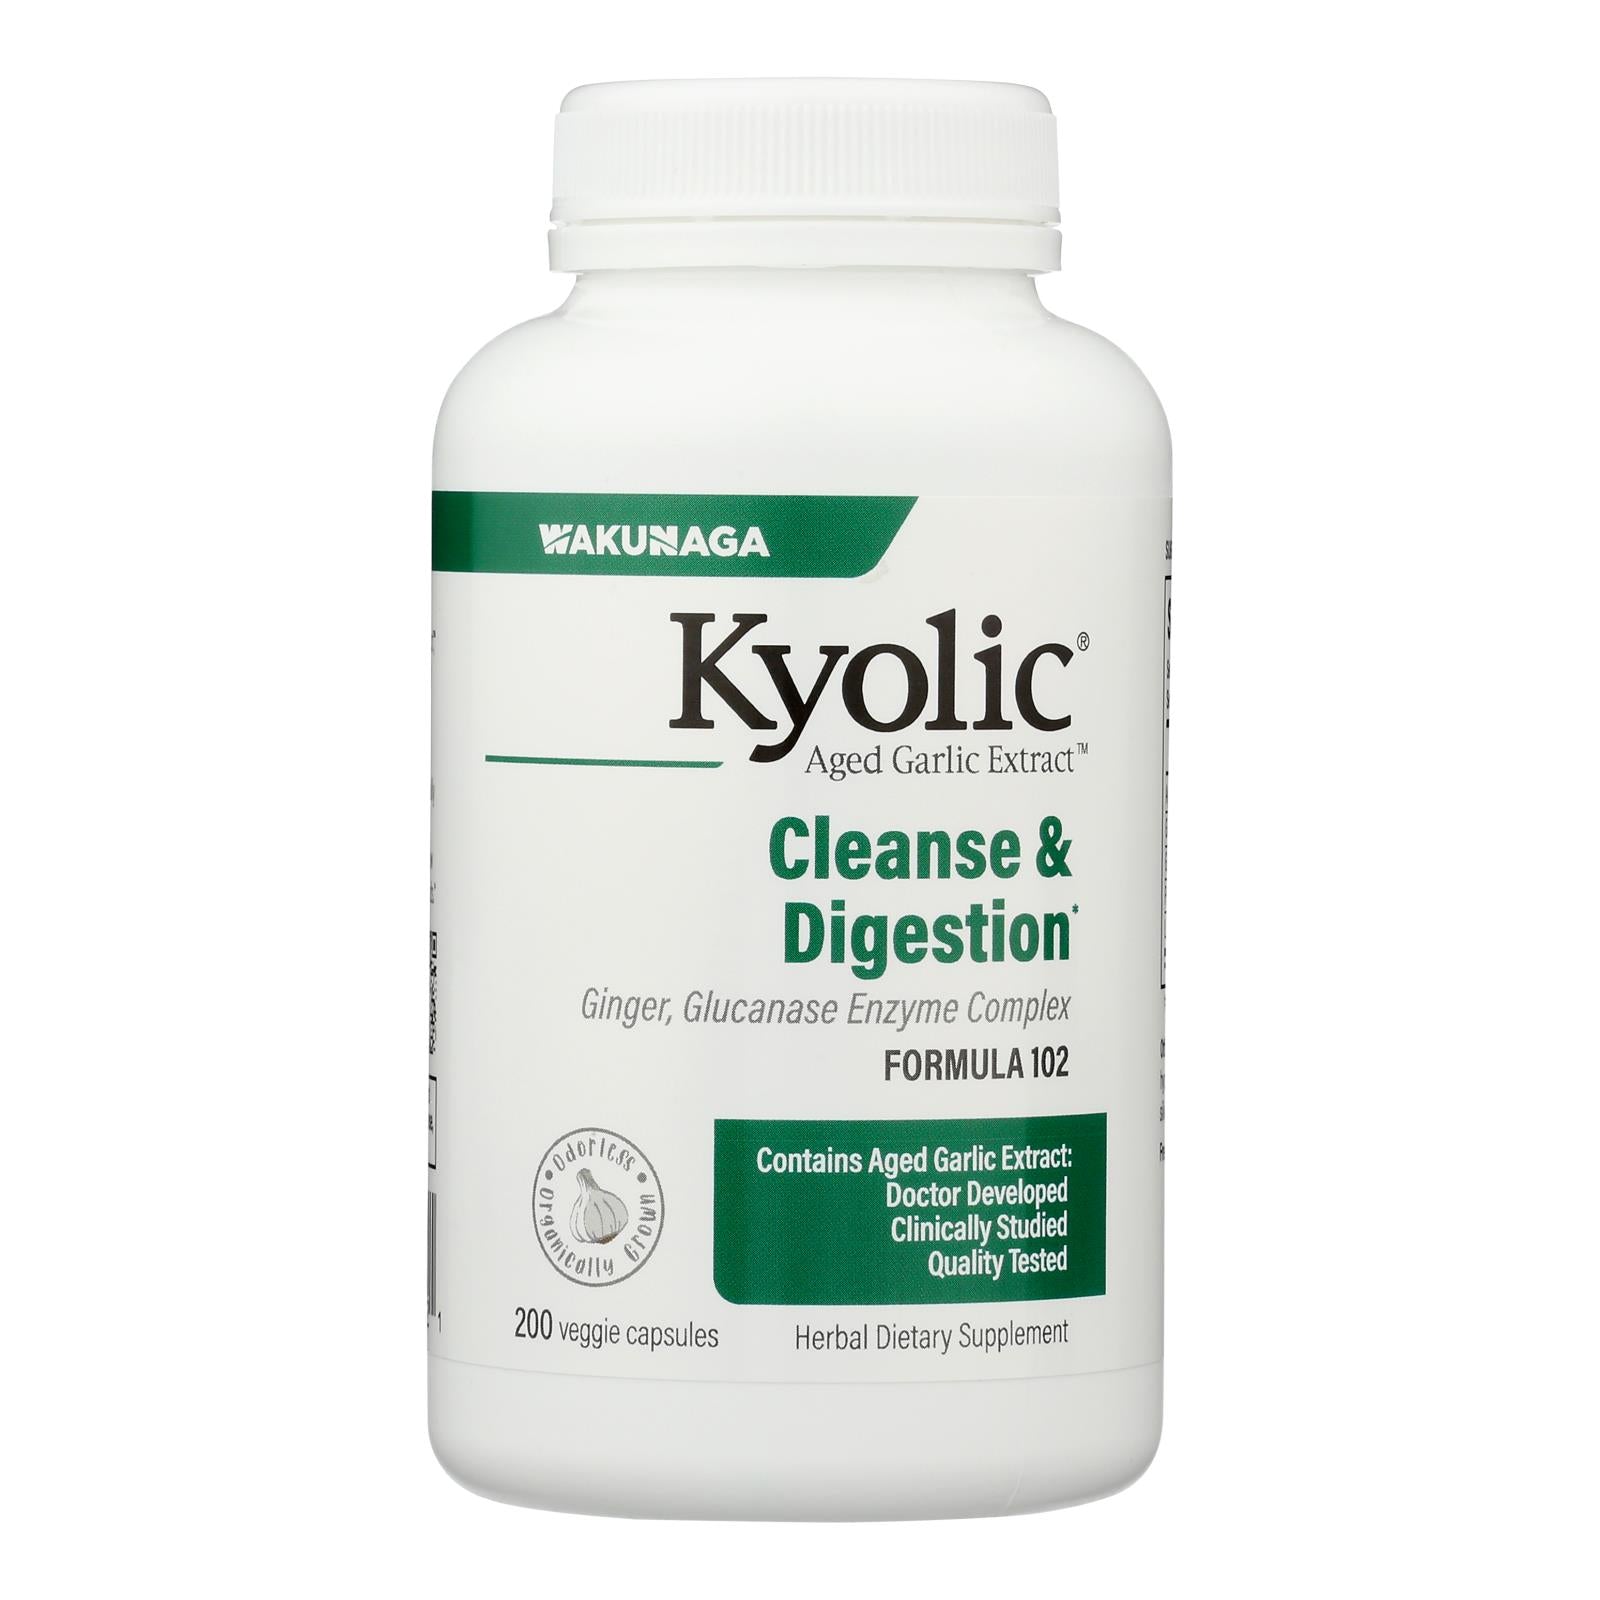 Kyolic - Aged Garlic Extract Candida Cleanse And Digestion Formula102 - 200 Vegetarian Capsules